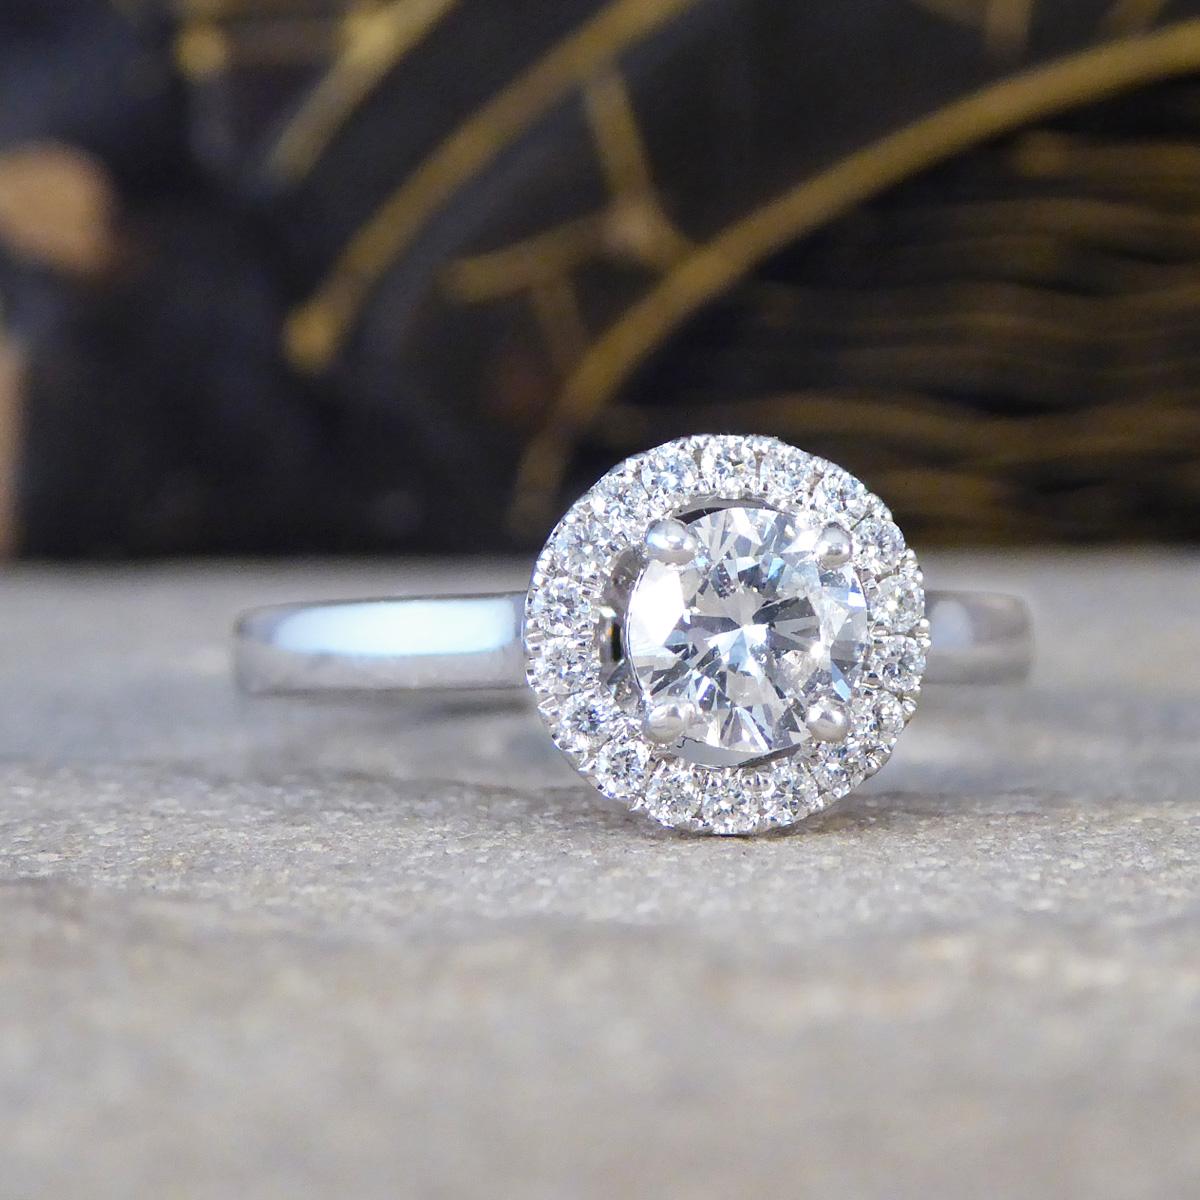 A beautiful and bright Diamond halo cluster ring set in platinum. This exquisite piece features a lovely 0.50ct re-homed stone at its centre, cut to perfection in a Brilliant Cut style, giving it the second hand price appeal with a brand new setting